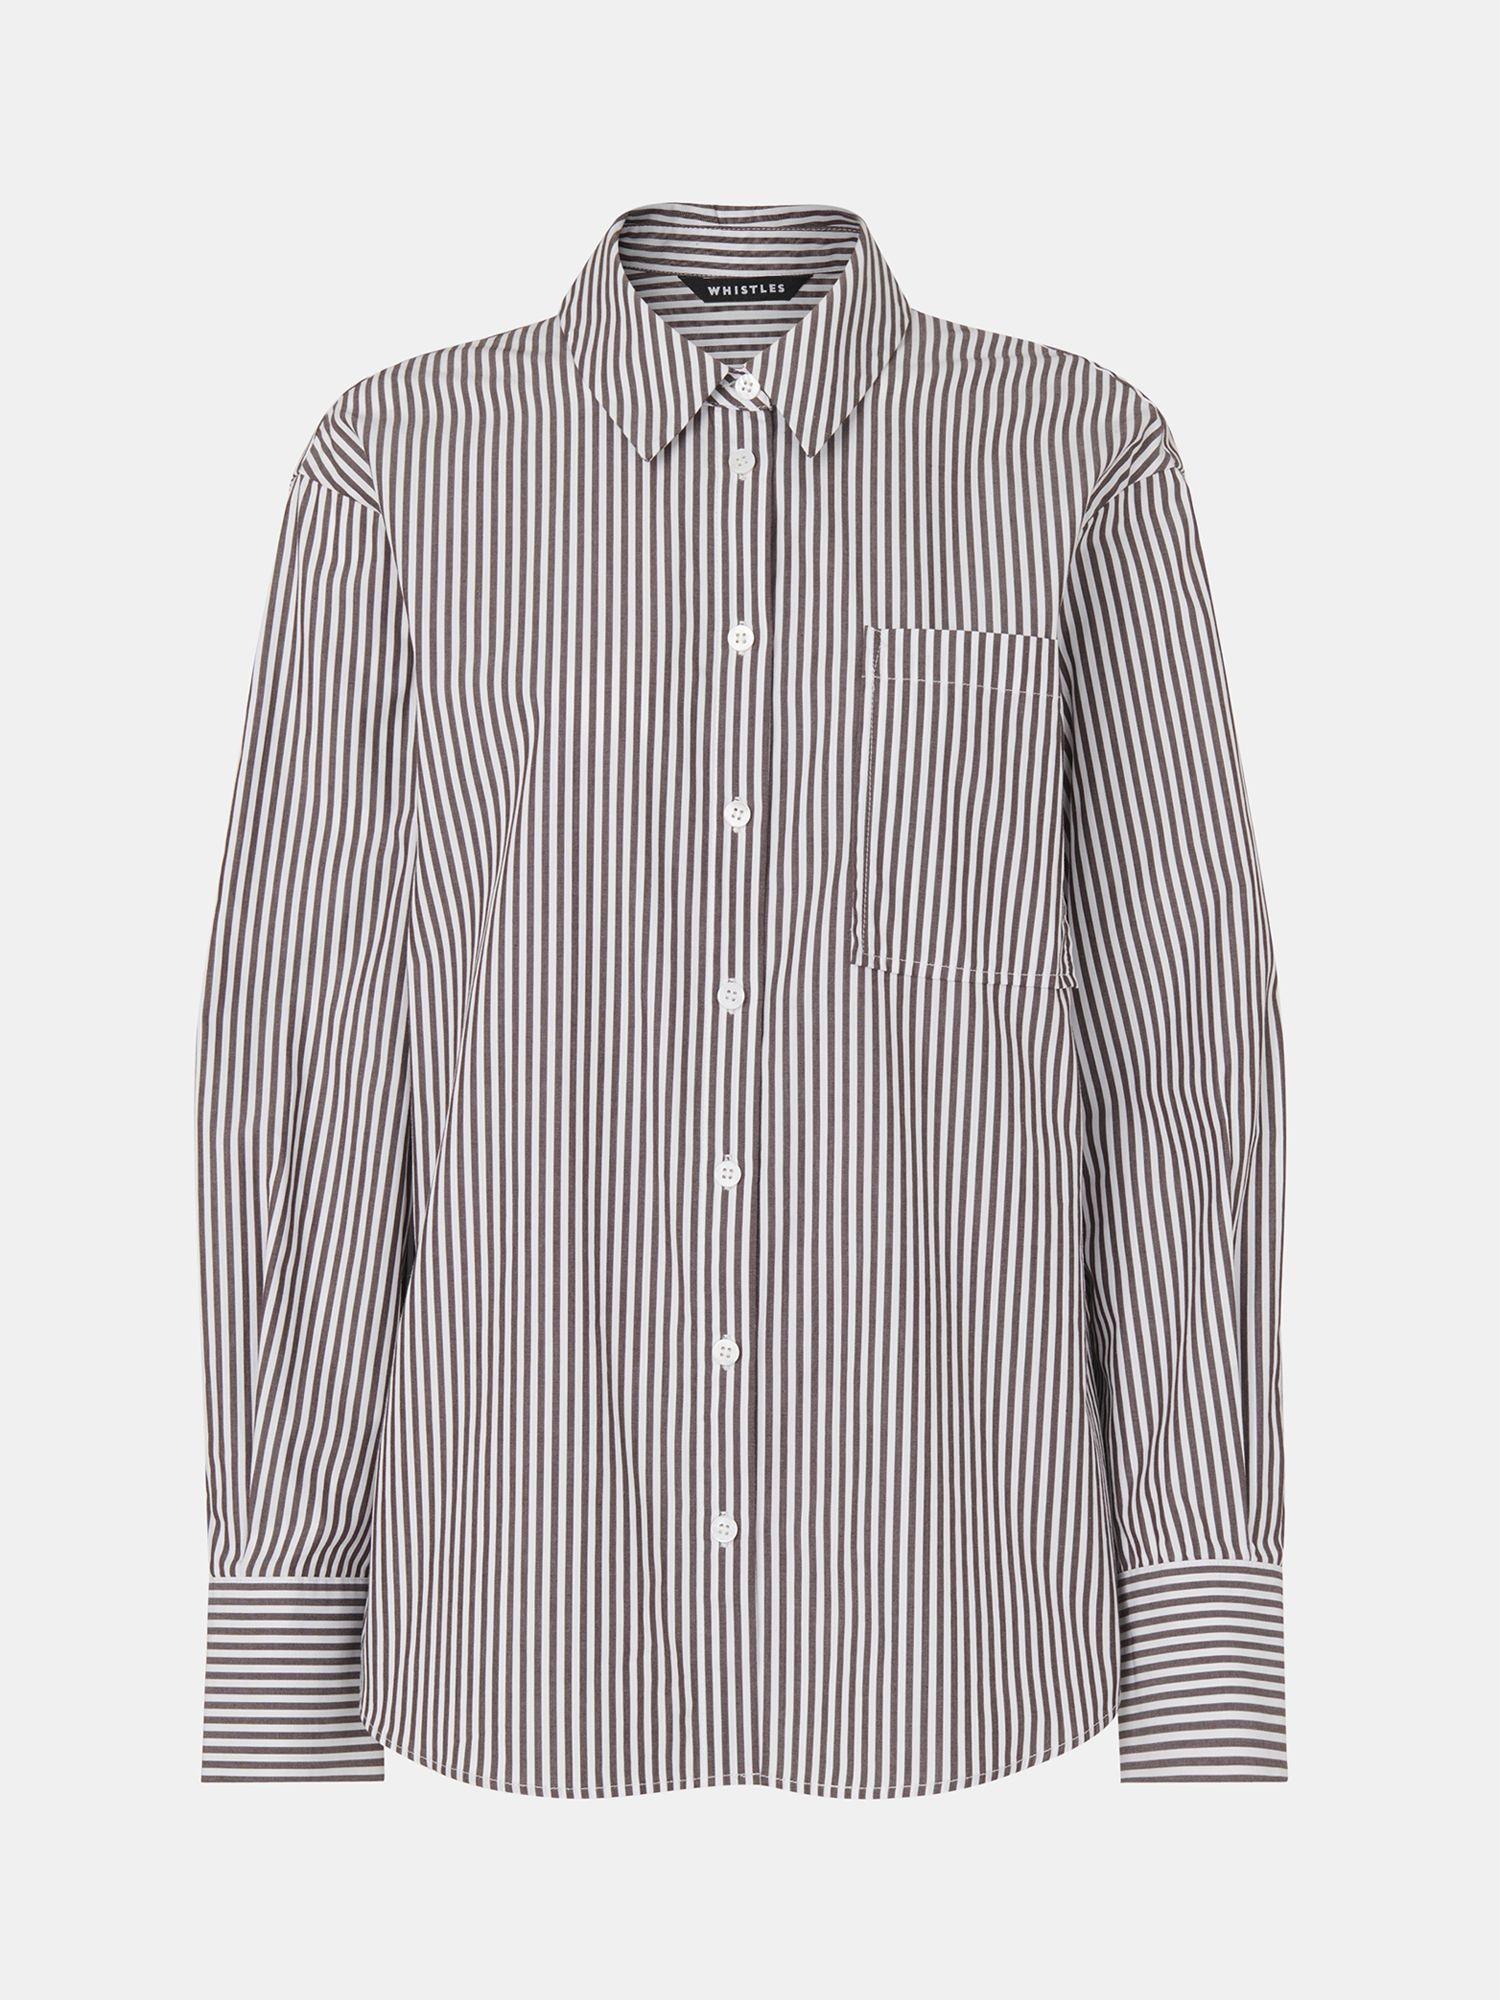 Buy Whistles Striped Relaxed Fit Shirt, Black/White Online at johnlewis.com